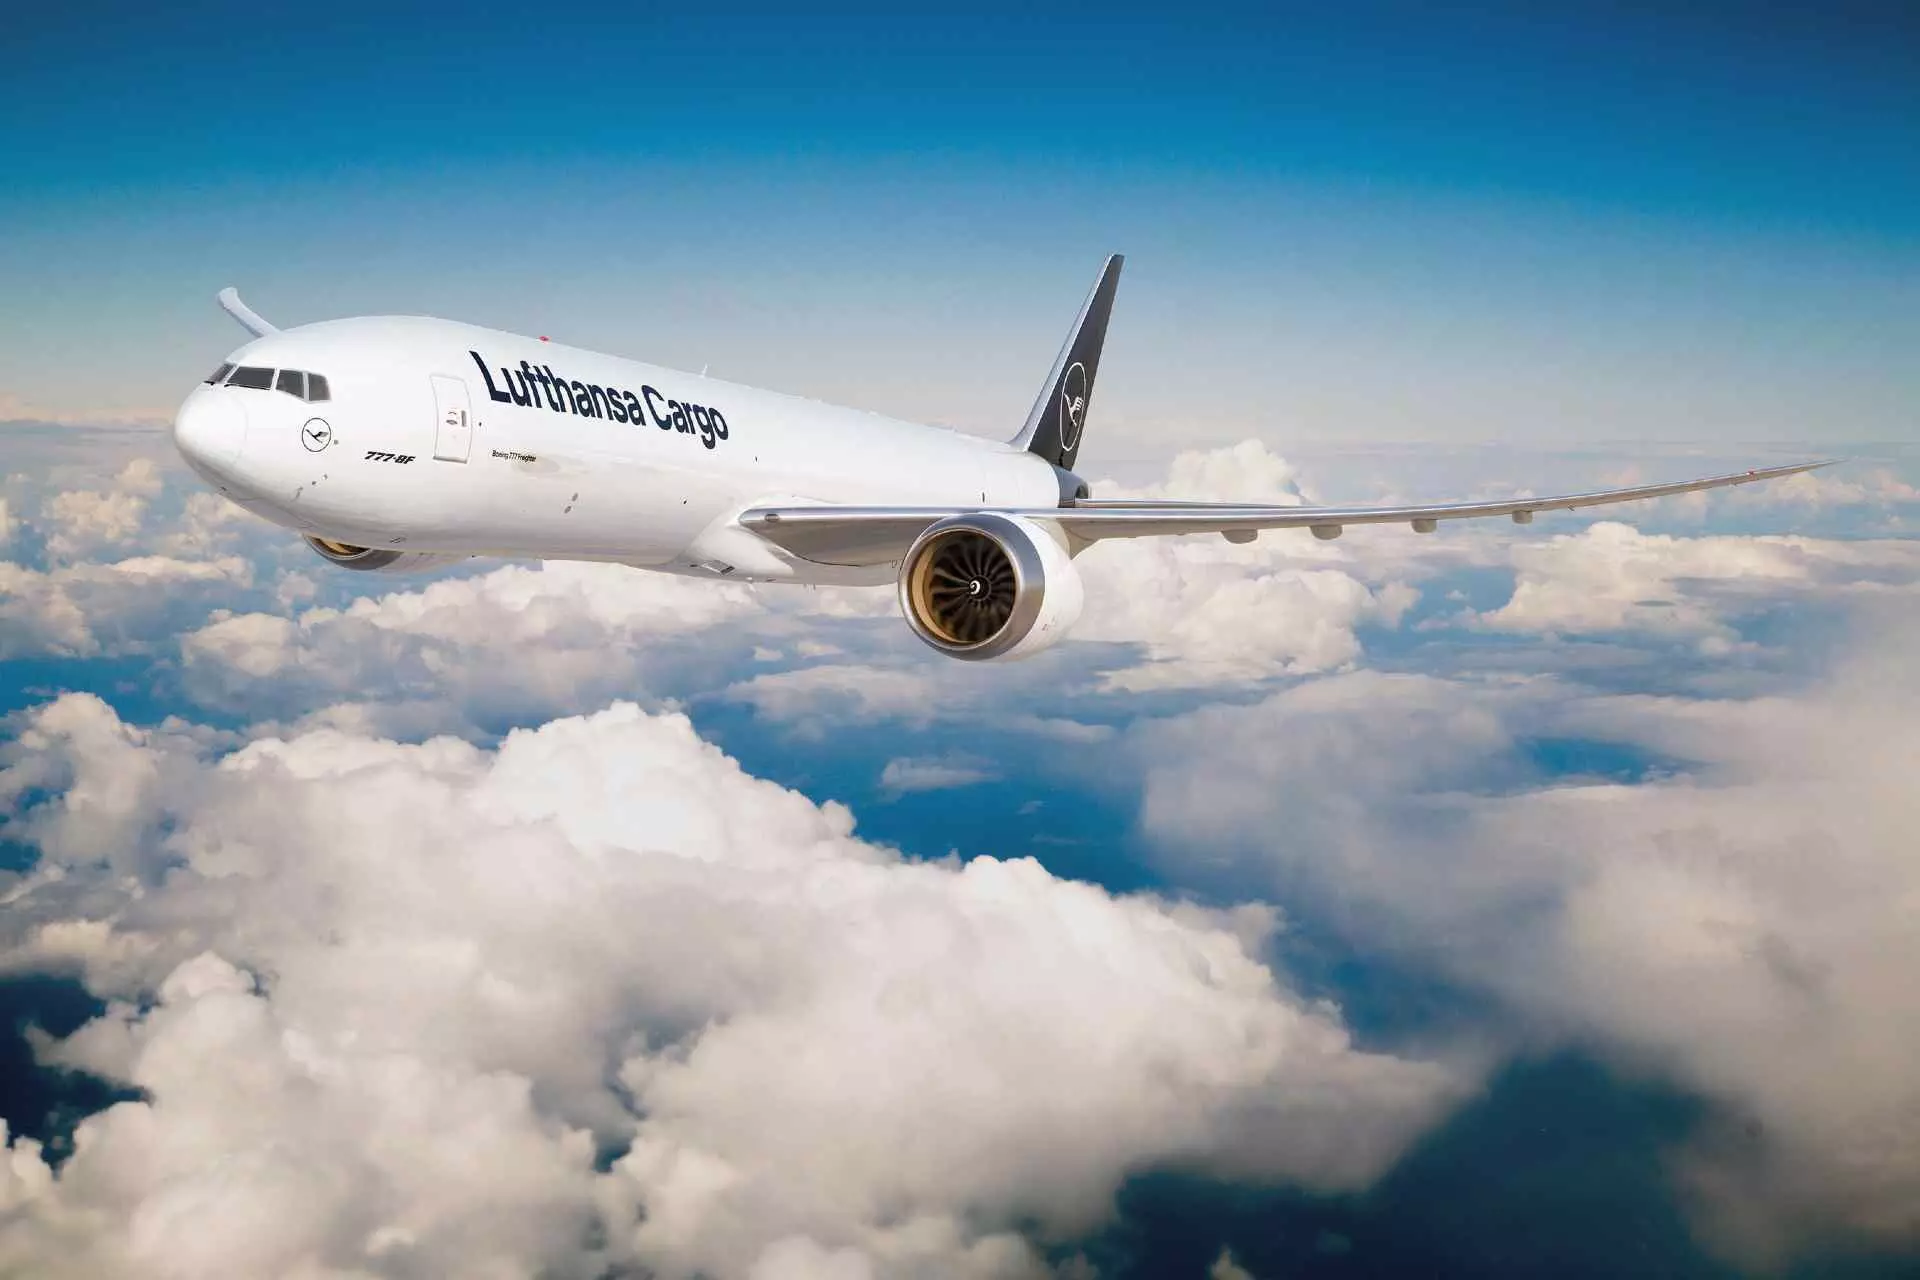 Lufthansa signs order for GE9X, GE90 engines to power cargo fleet